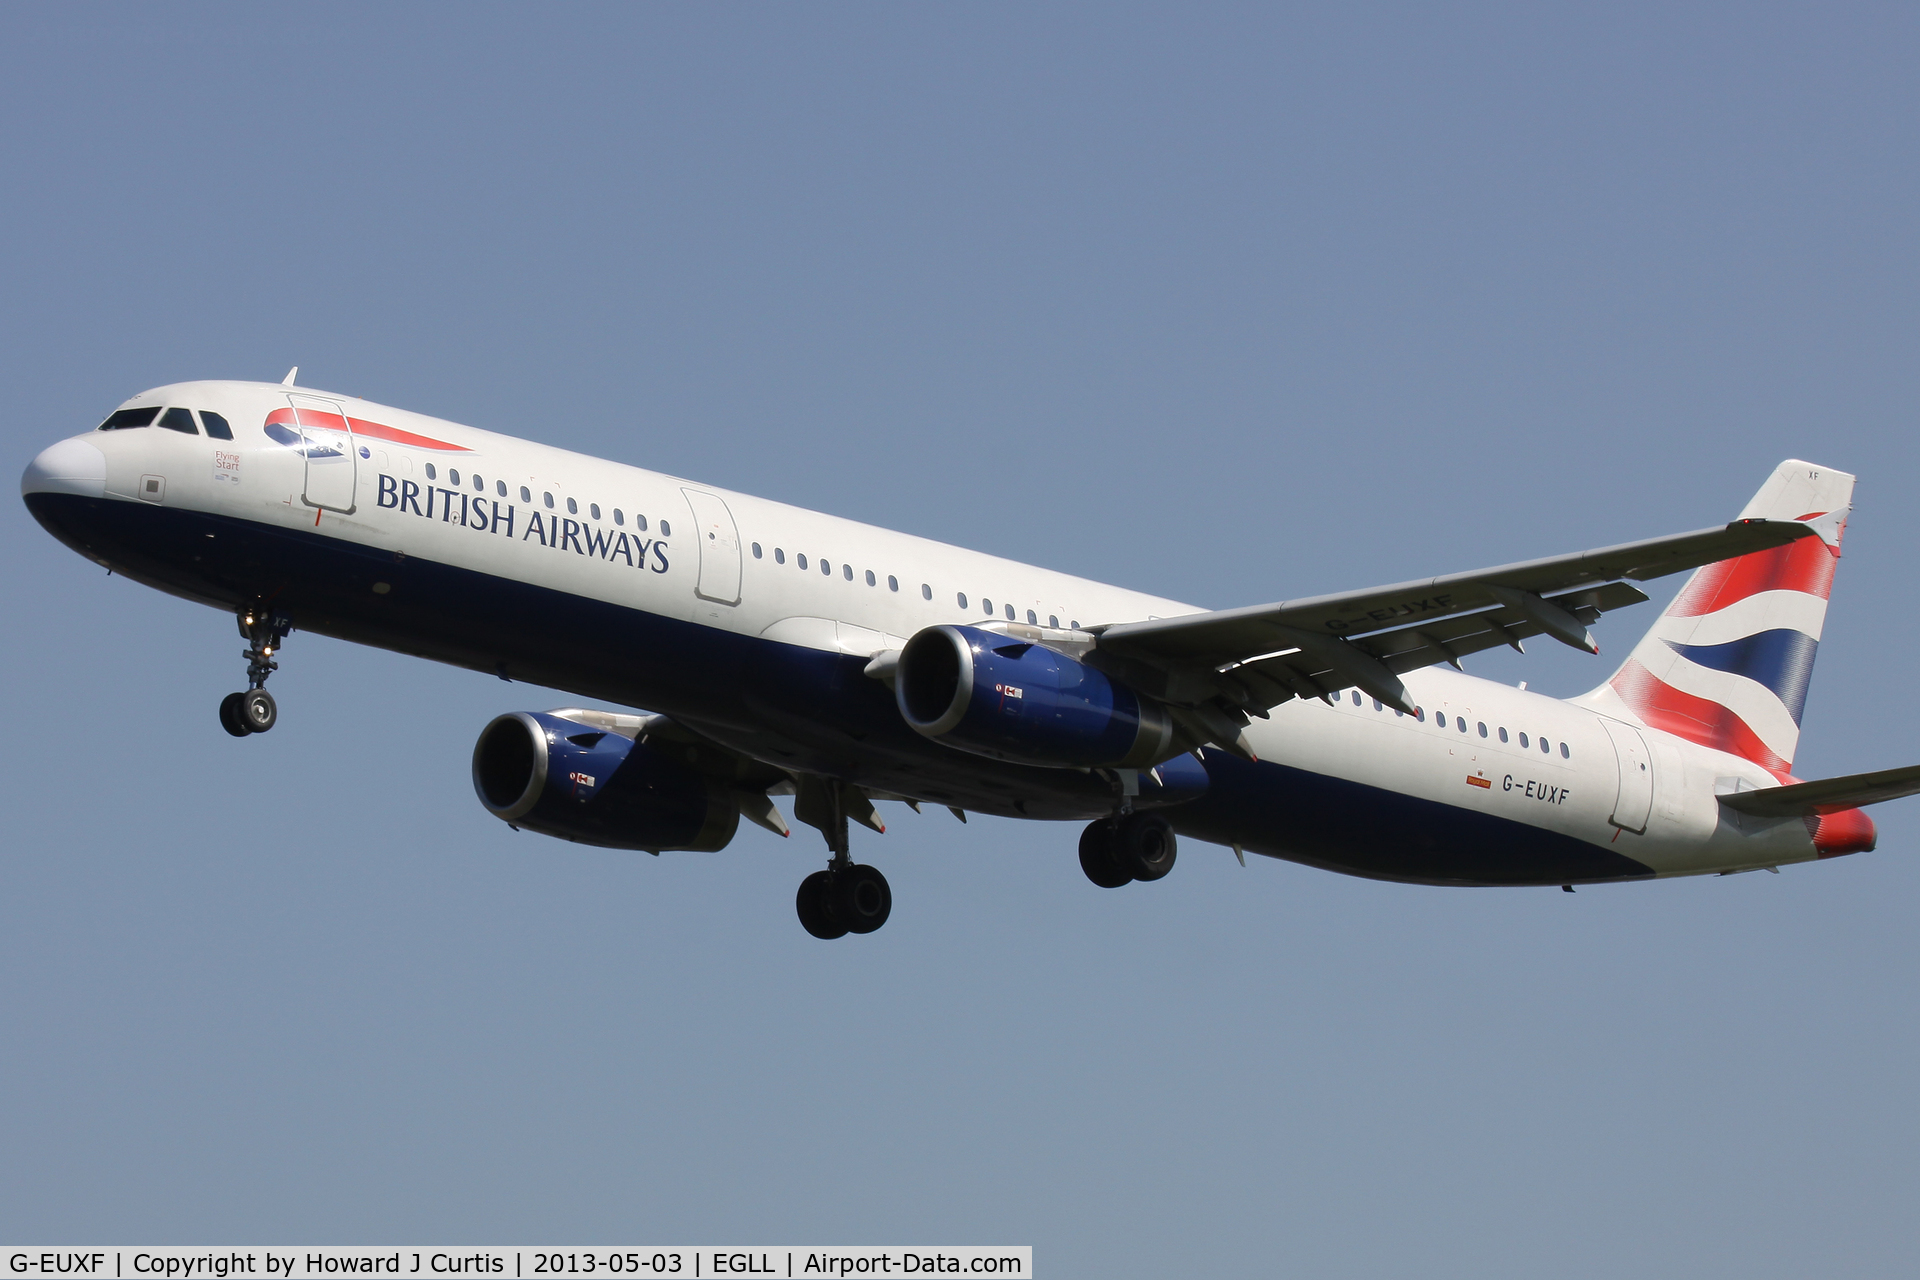 G-EUXF, 2004 Airbus A321-231 C/N 2324, British Airways, on approach to runway 27L.